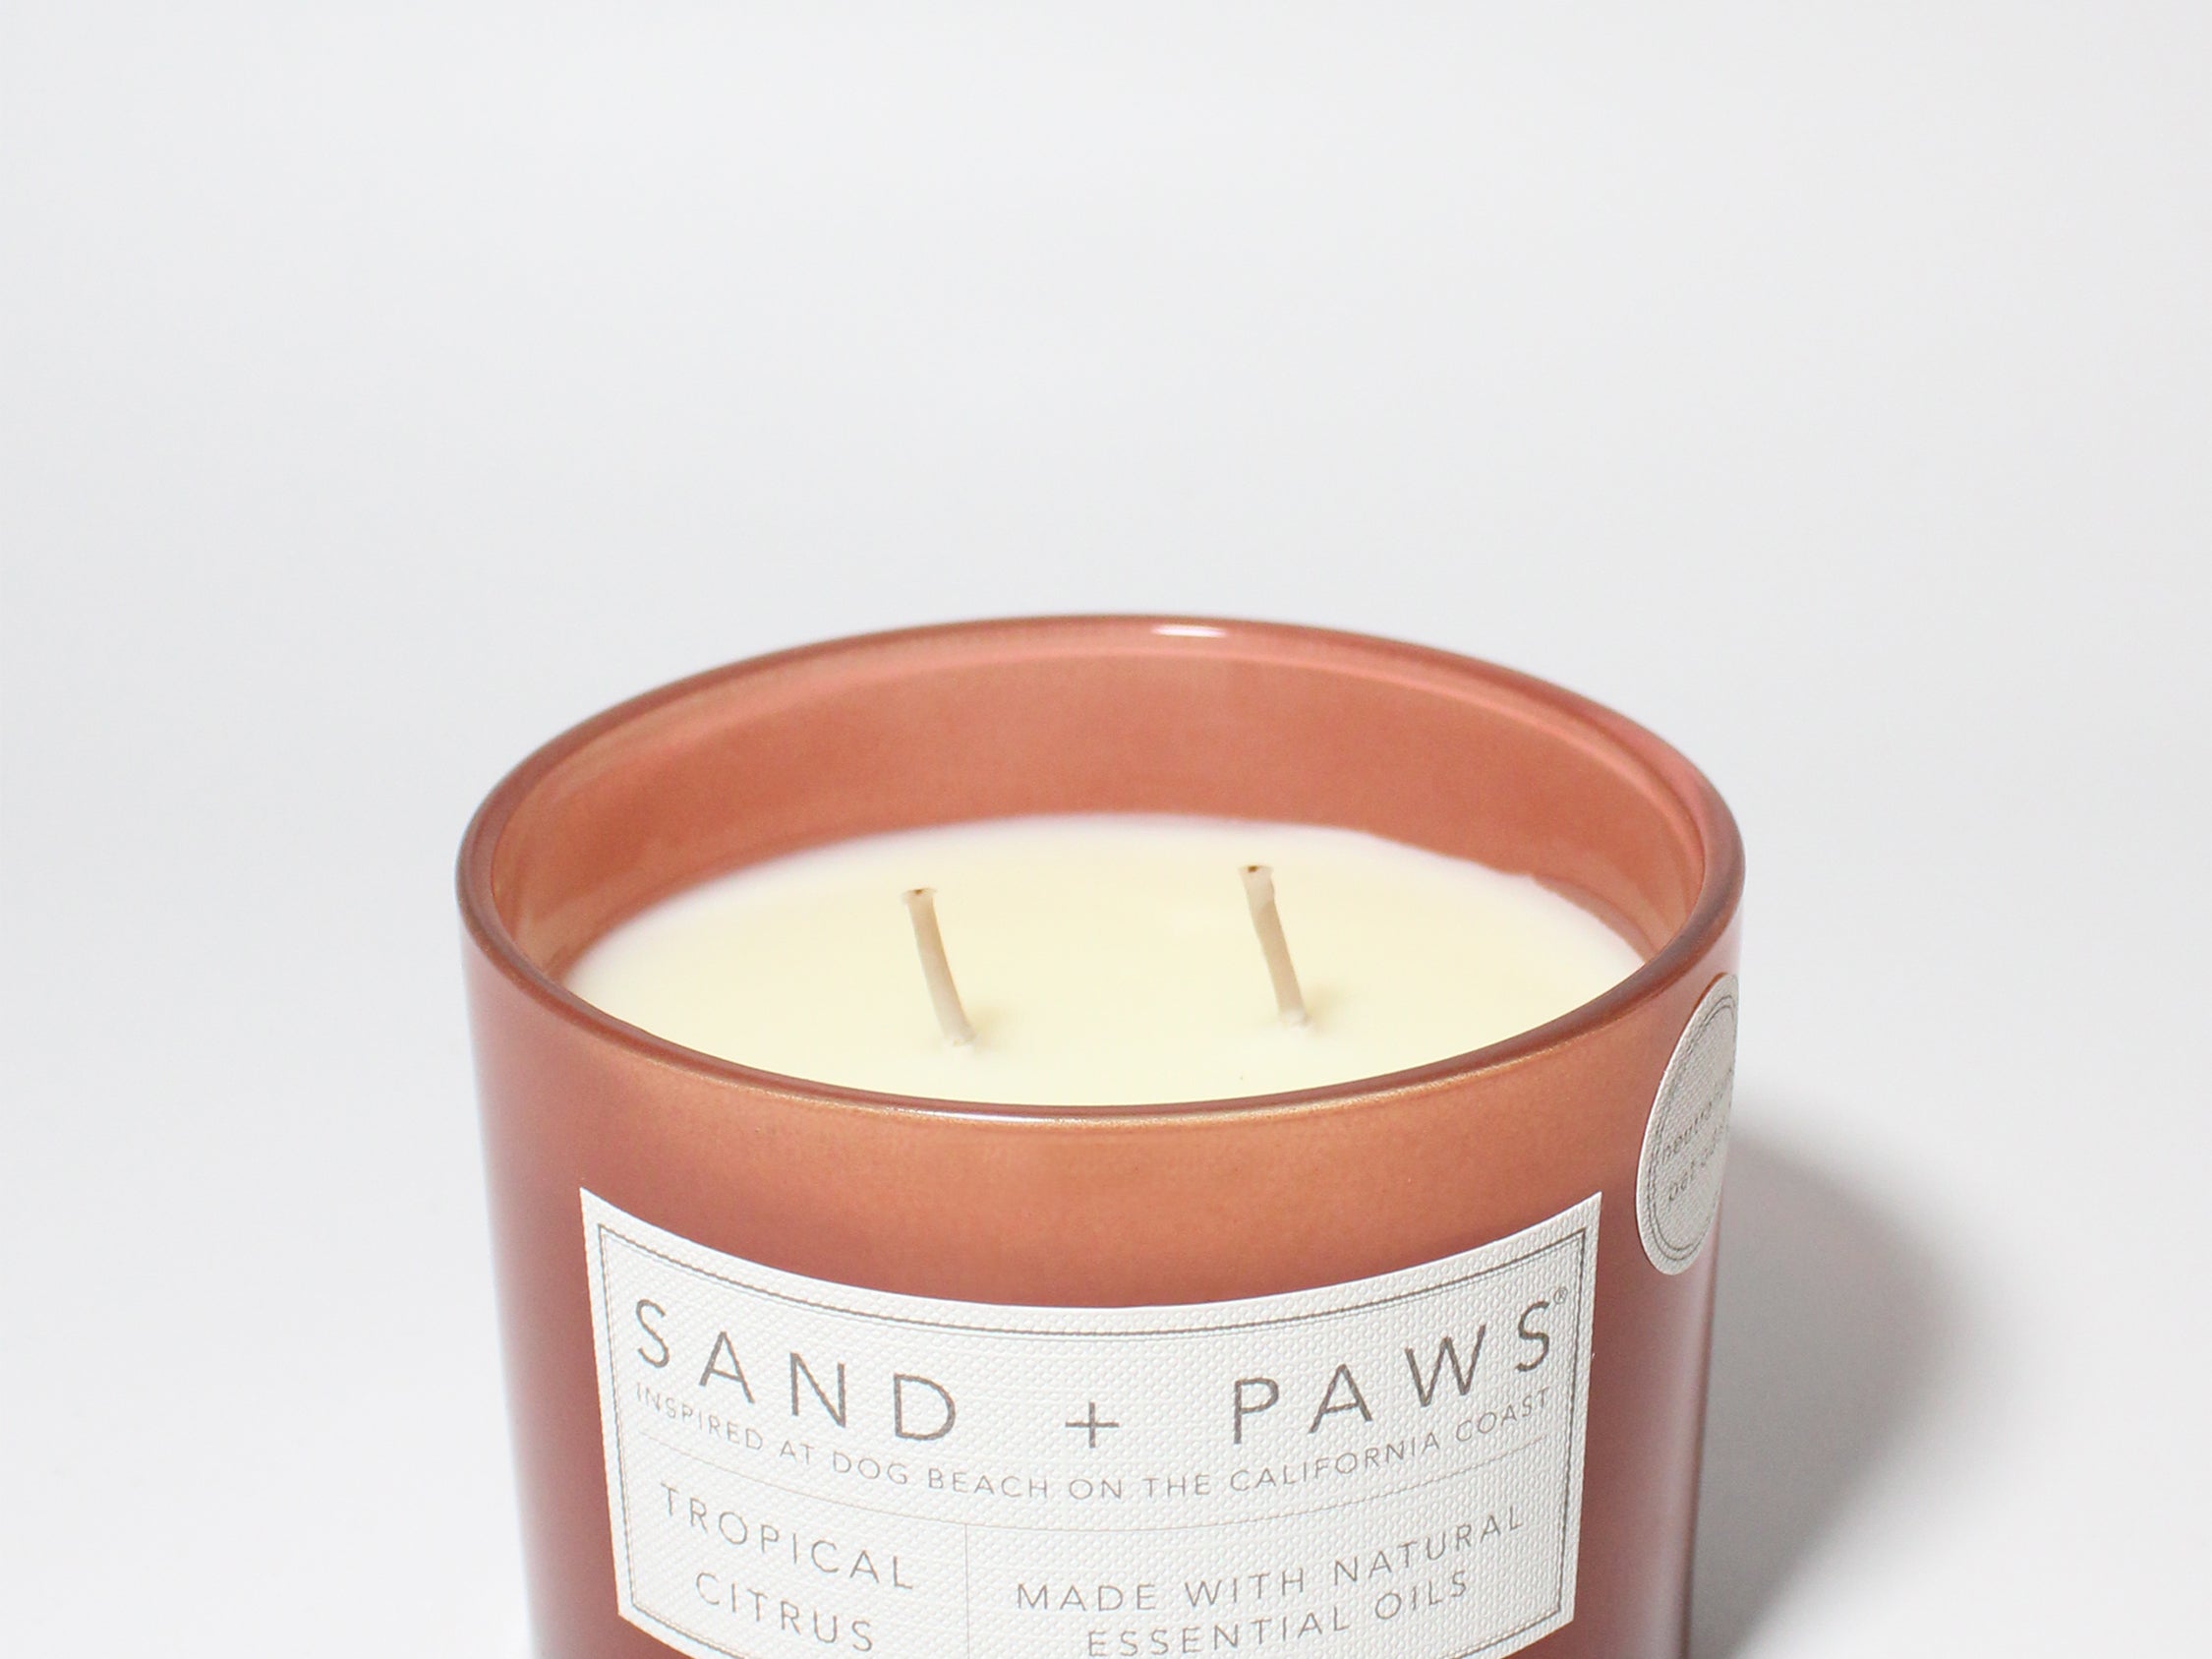 Sand + Paws Tropical Citrus 12 oz scented candle Terra Cotta vessel with I PAW YOU carved lid